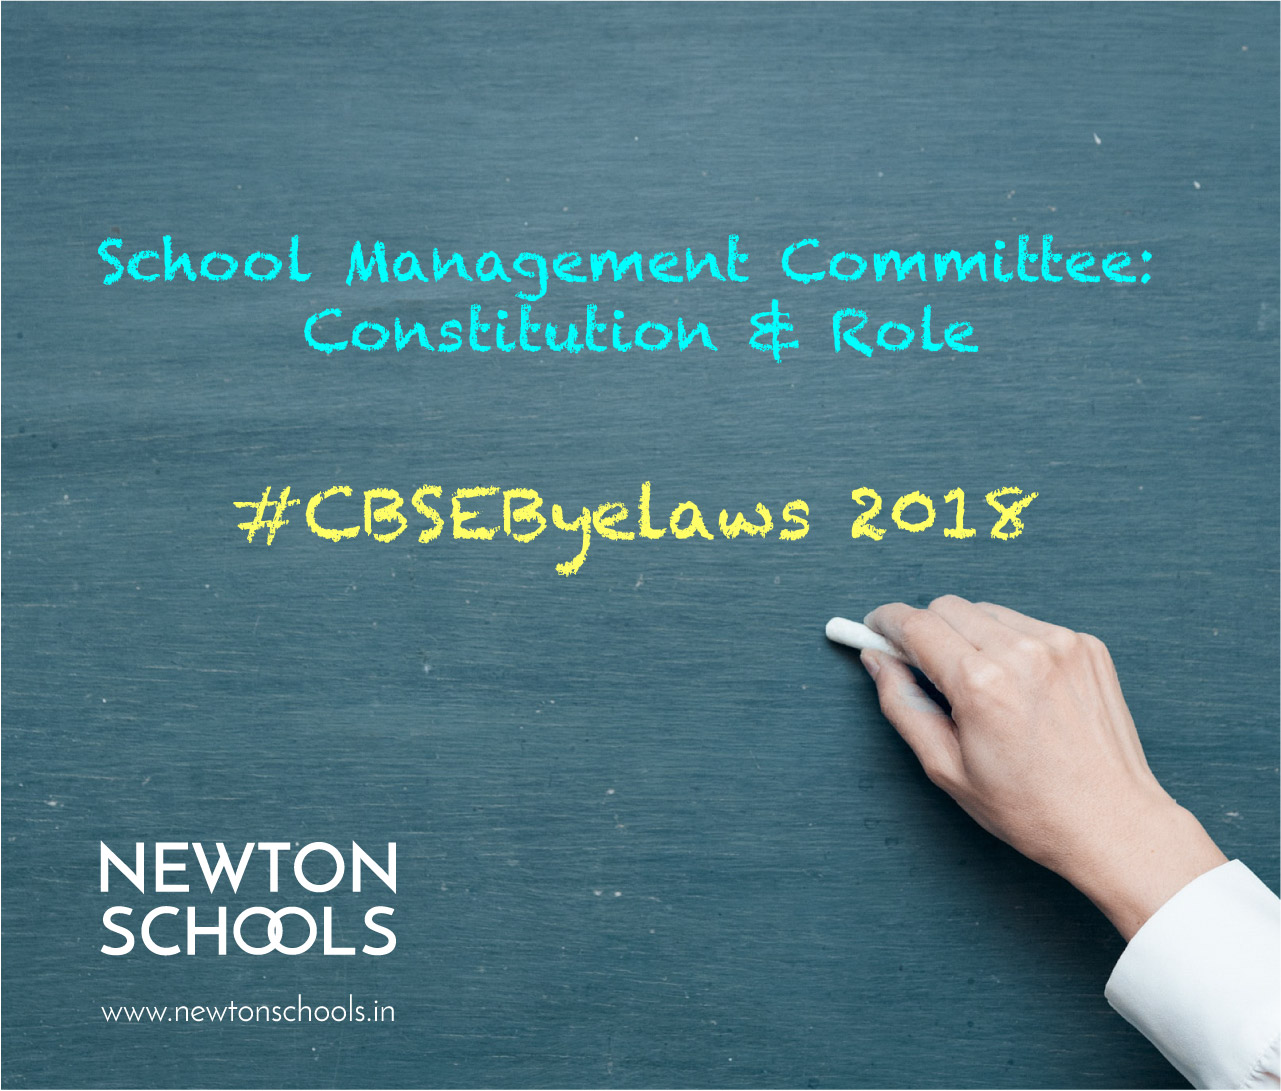 Composition & Role of School Management Committee: 2018 CBSE Affiliation Byelaws